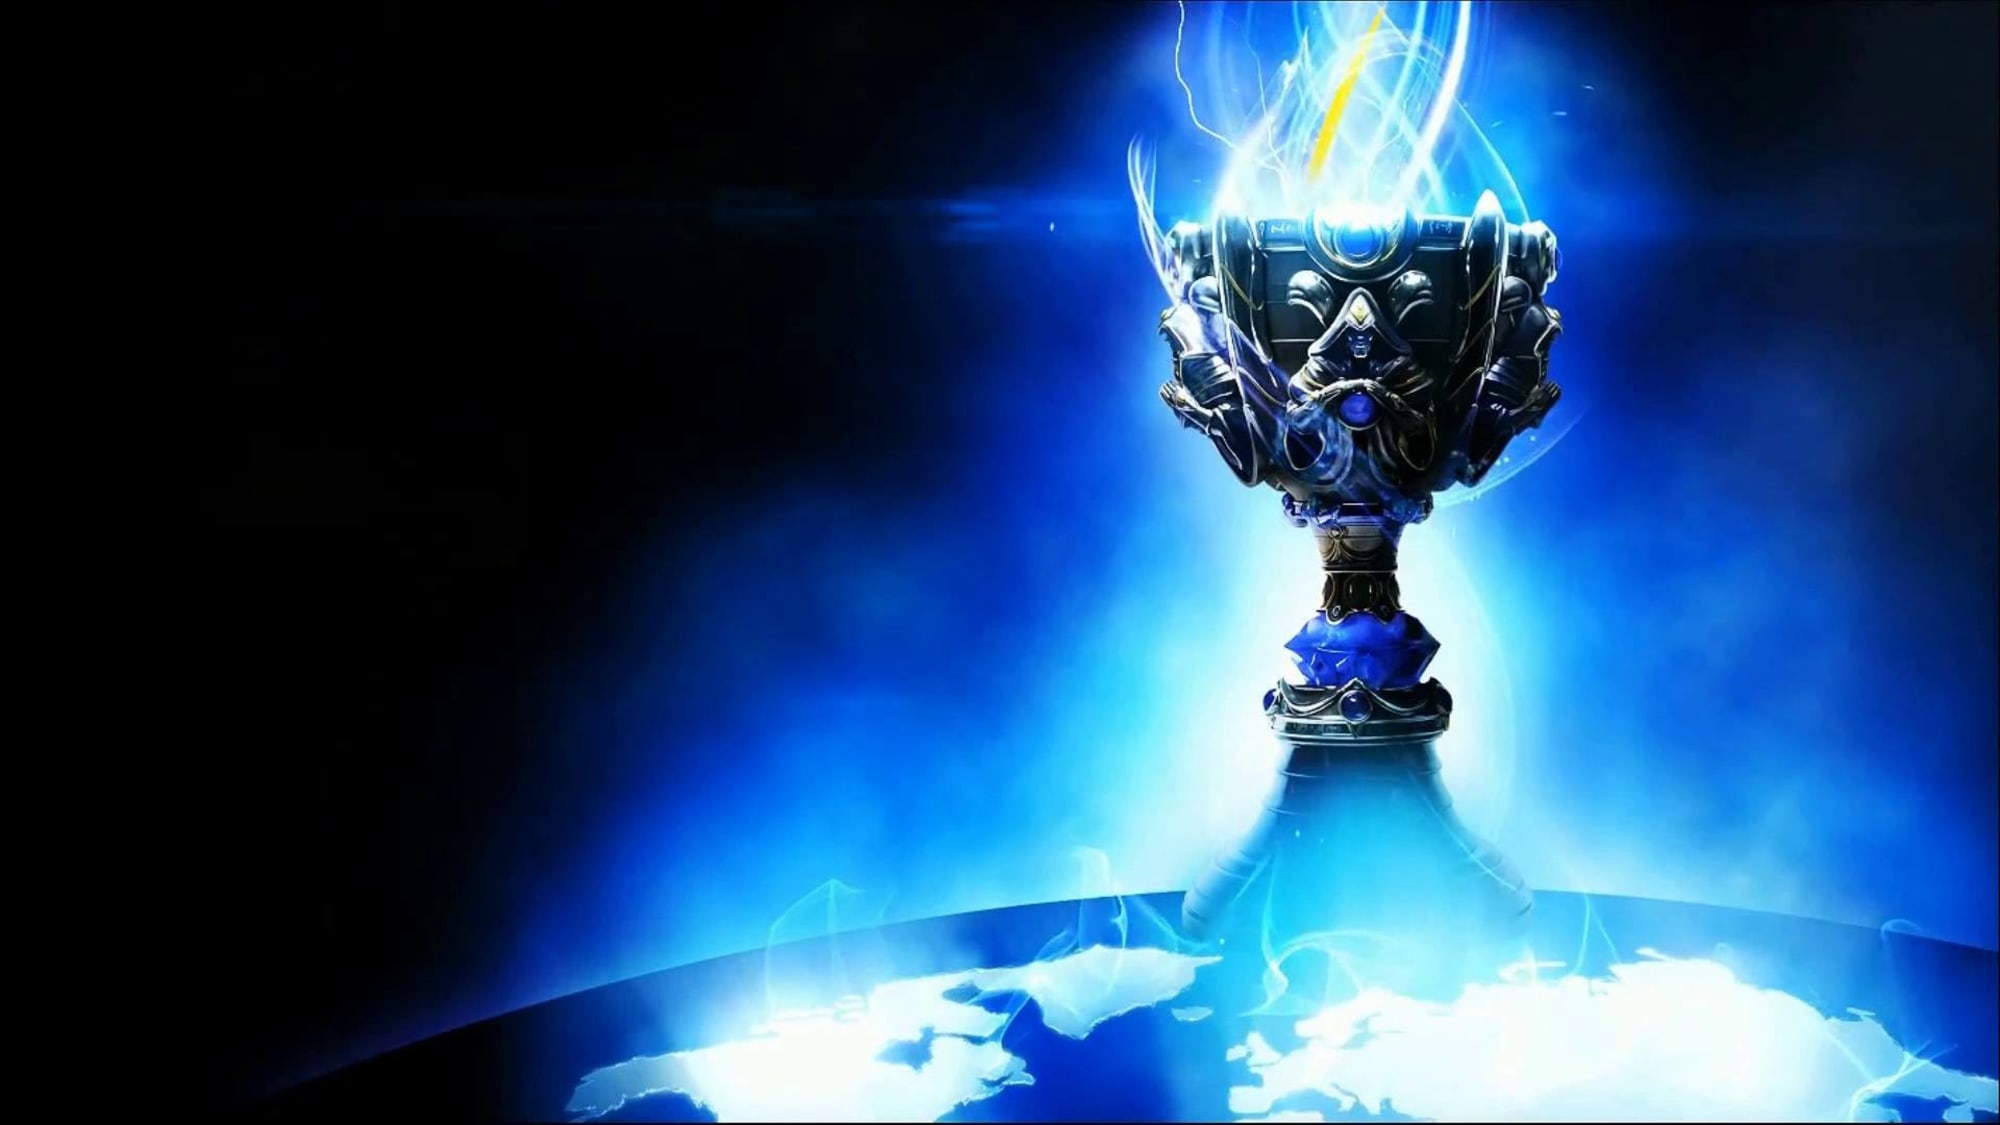 2016 World Championship to be held in North America